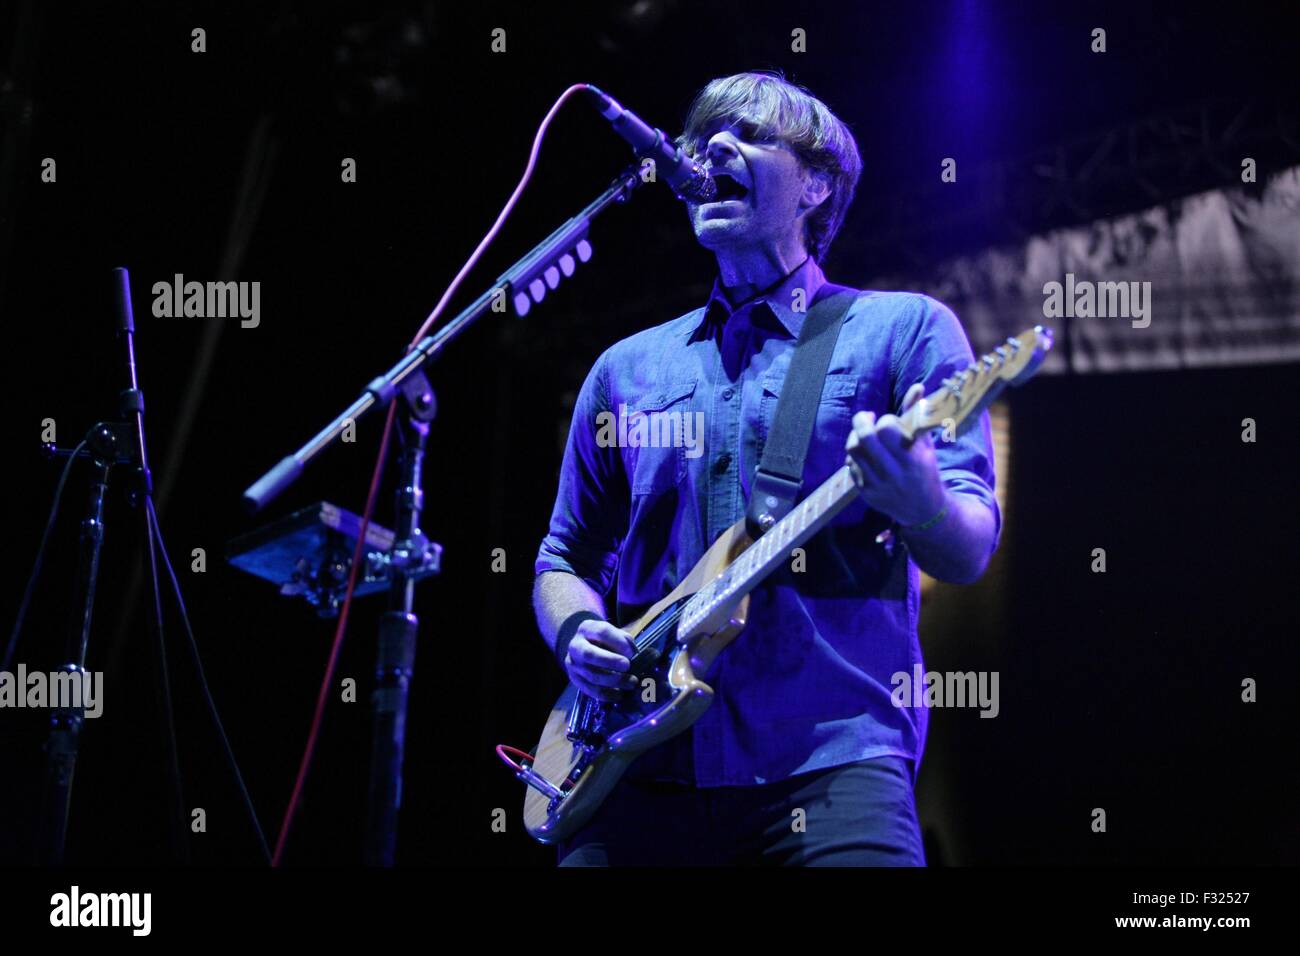 Las Vegas, NV, USA. 27th Sep, 2015. Ben Gibbard of Death Cab for Cutie in attendance for 2015 Life Is Beautiful Festival - SUN, Downtown, Las Vegas, NV September 27, 2015. © James Atoa/Everett Collection/Alamy Live News Stock Photo